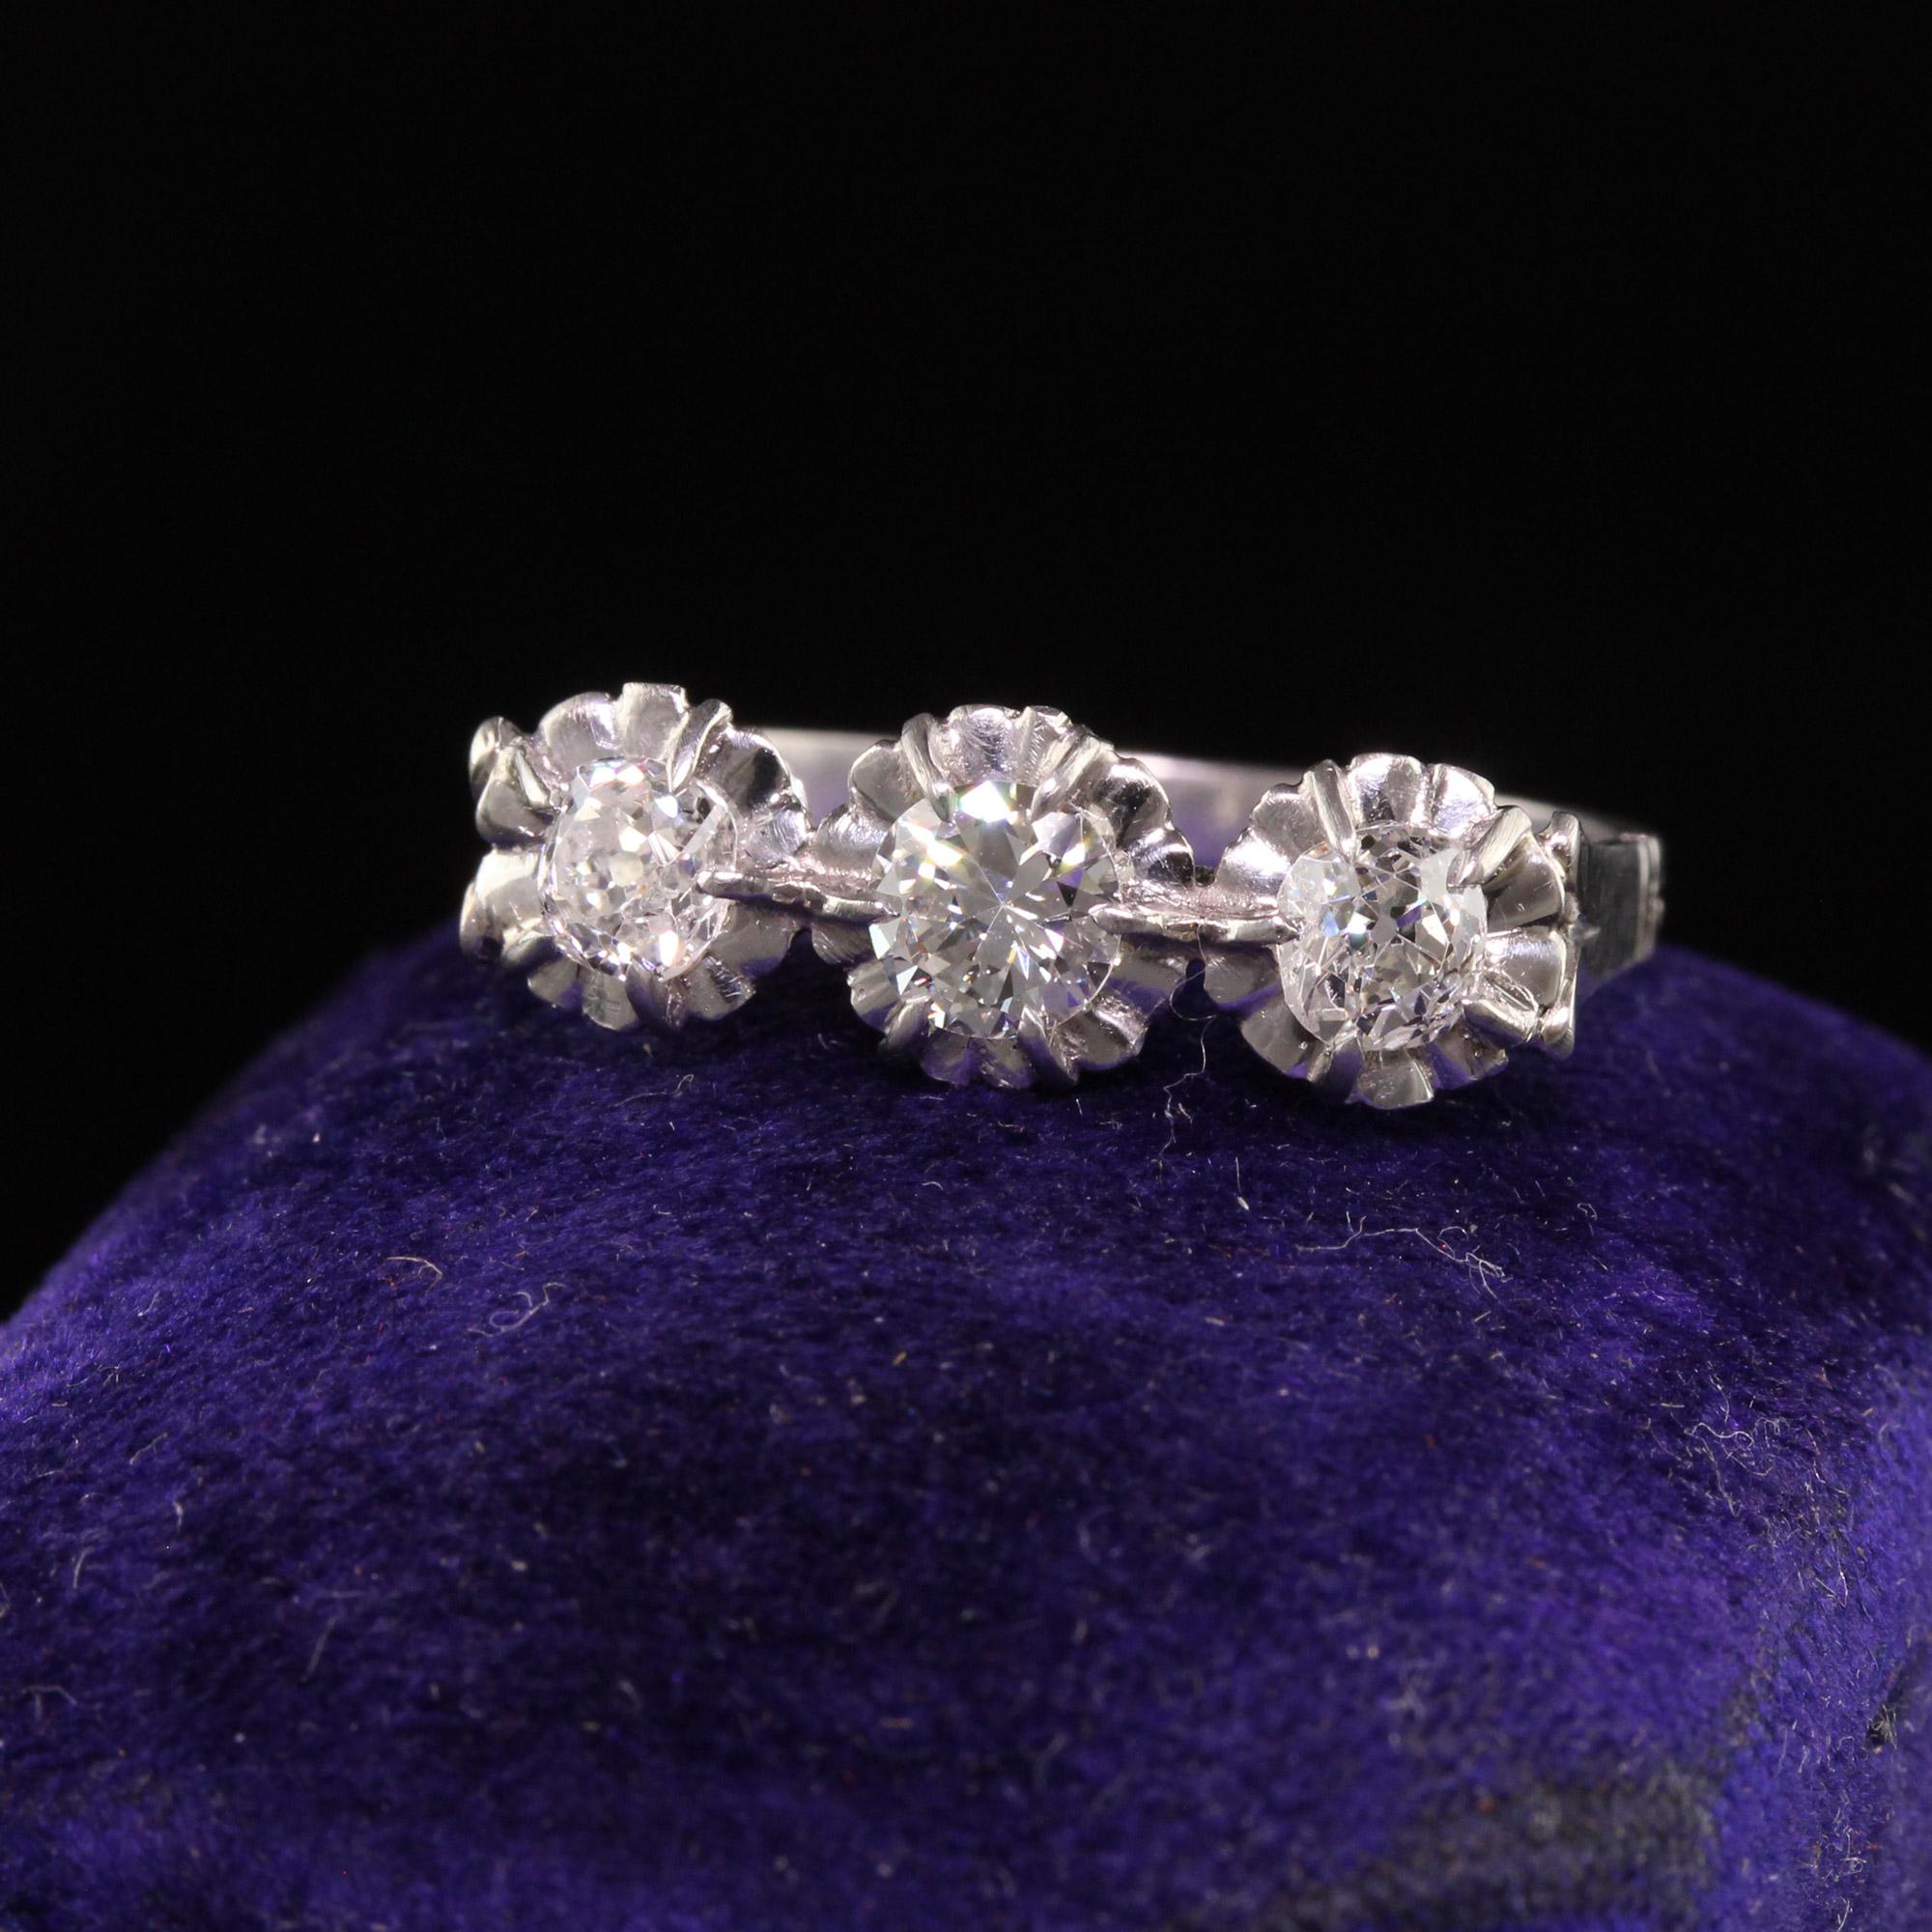 Beautiful Antique Art Deco Platinum Hallmarked Old Mine Diamond Three Stone Ring. This gorgeous three stone ring is crafted in platinum. It has three old mine cut diamonds set on the top and has two hallmarks outside of the shank which appear to be